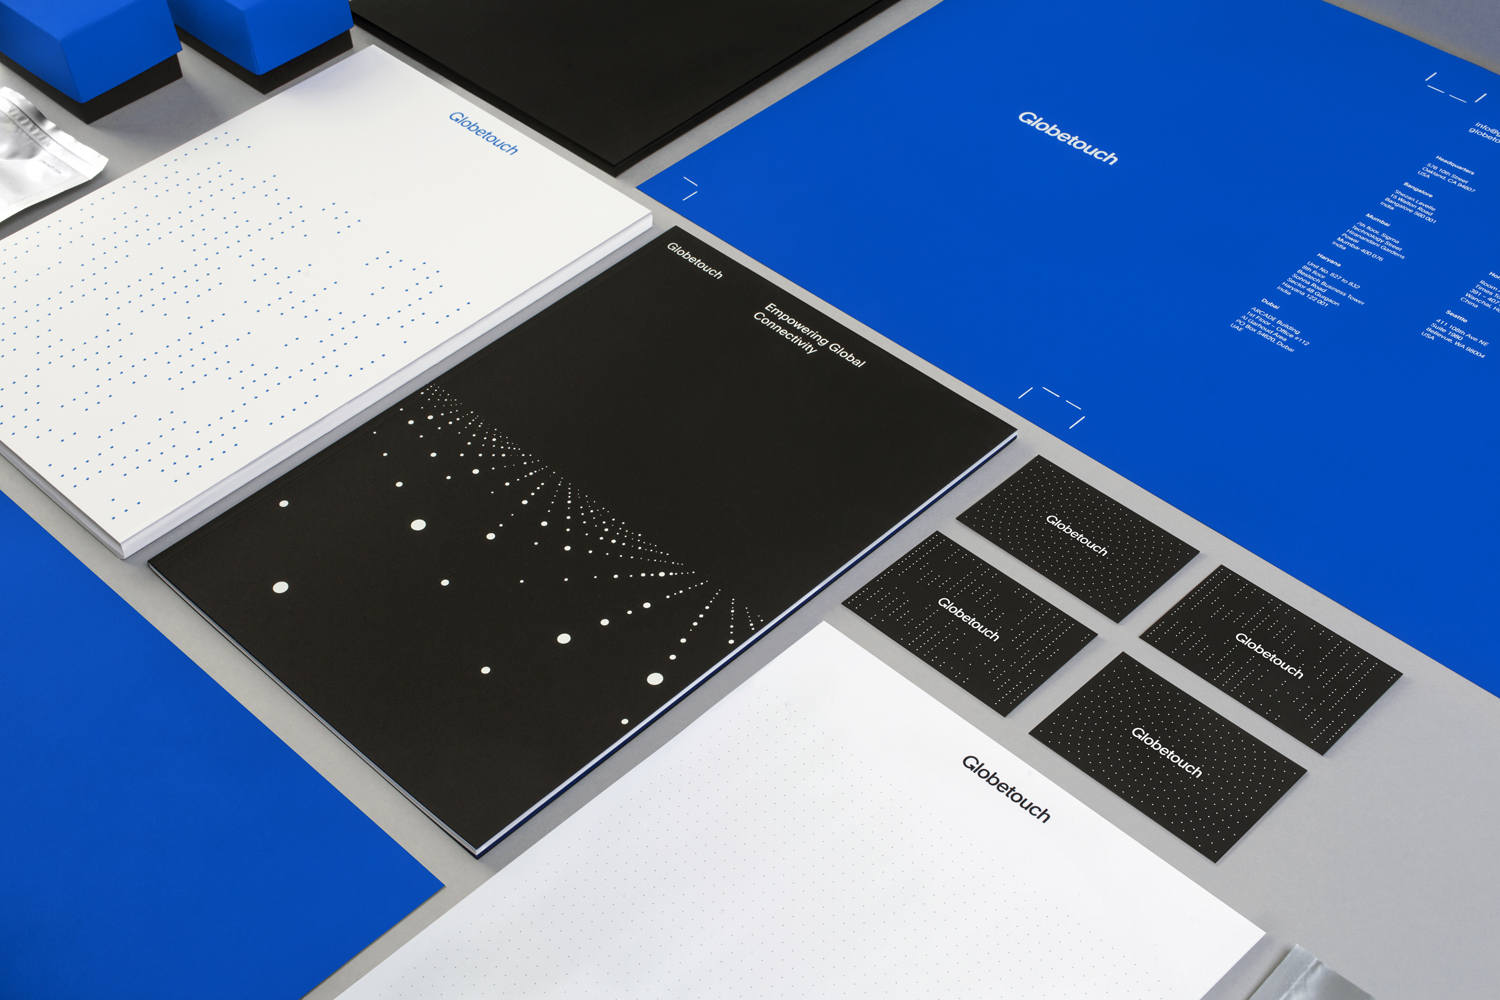 Brand identity, stationery and print communication for global mobile communications platform Globetouch by graphic designs studio Bunch